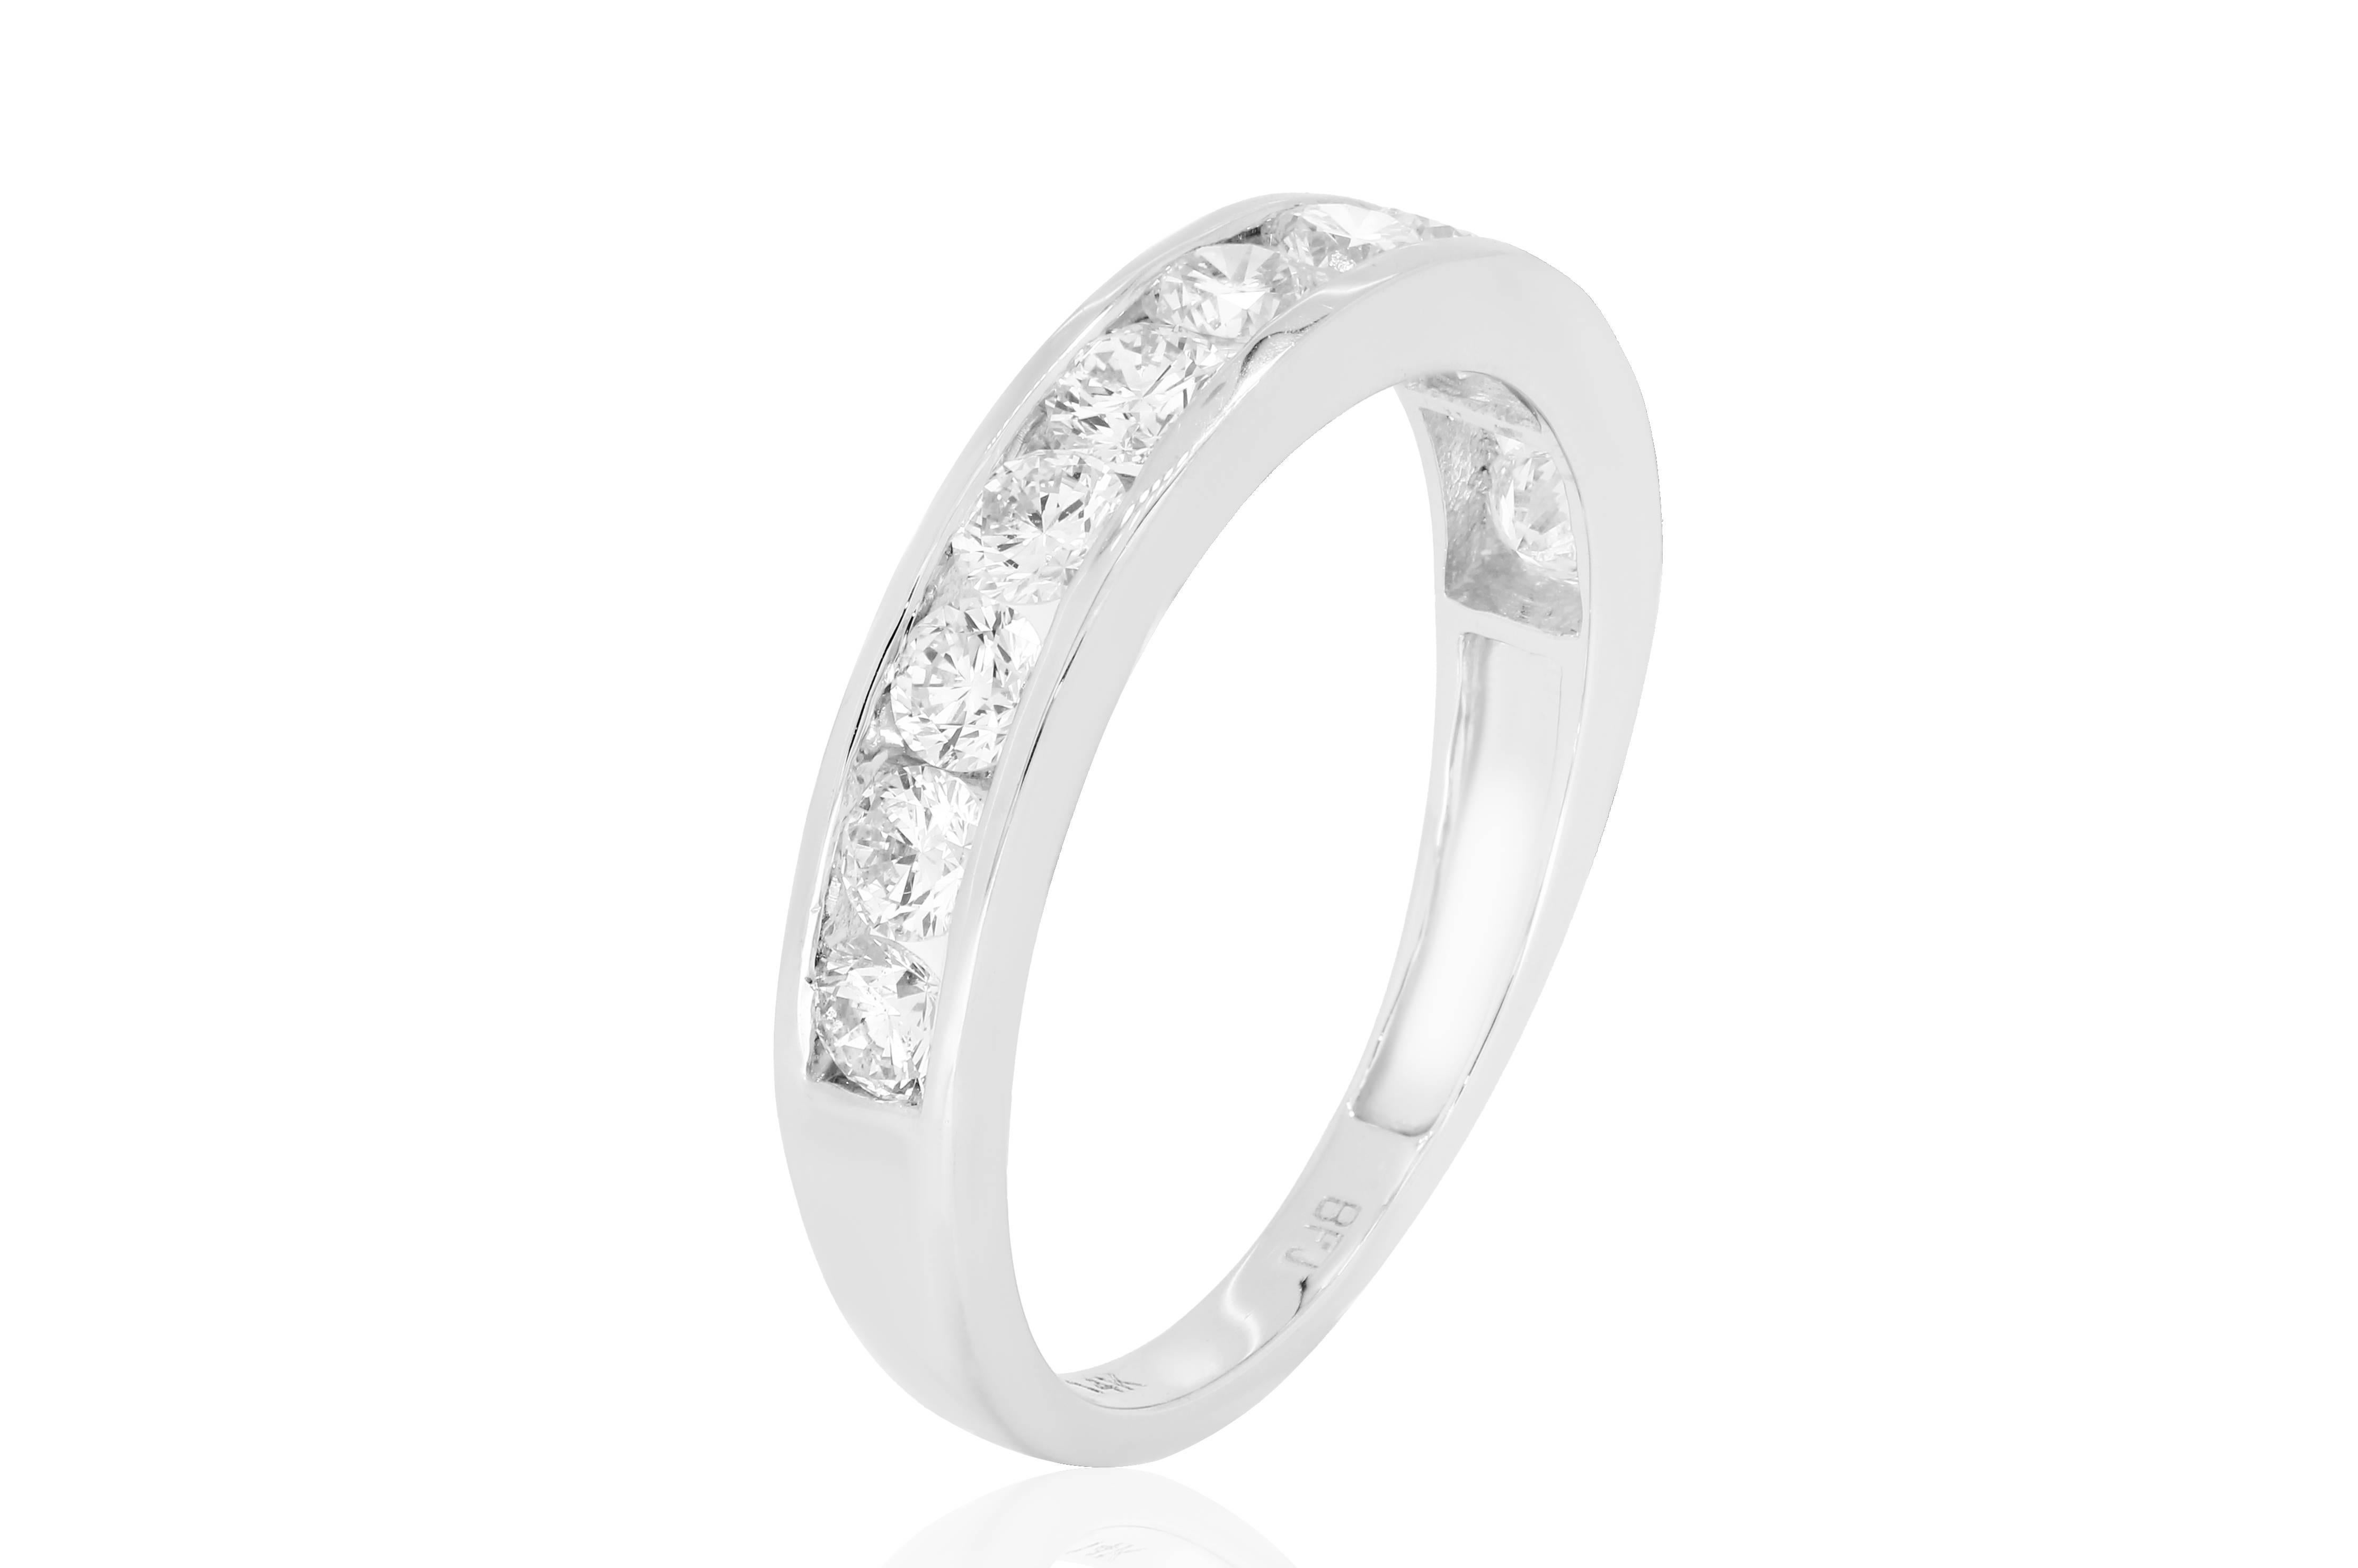 A True Classic 11 White Diamond Rounds GH Color VS-SI Clarity 0.25 Carat Channel set in 14k White gold Fashion Cocktail Bridal Band Ring.

Style available in different price ranges. Prices are based on your selection of 4C's Cut, Color, Carat,